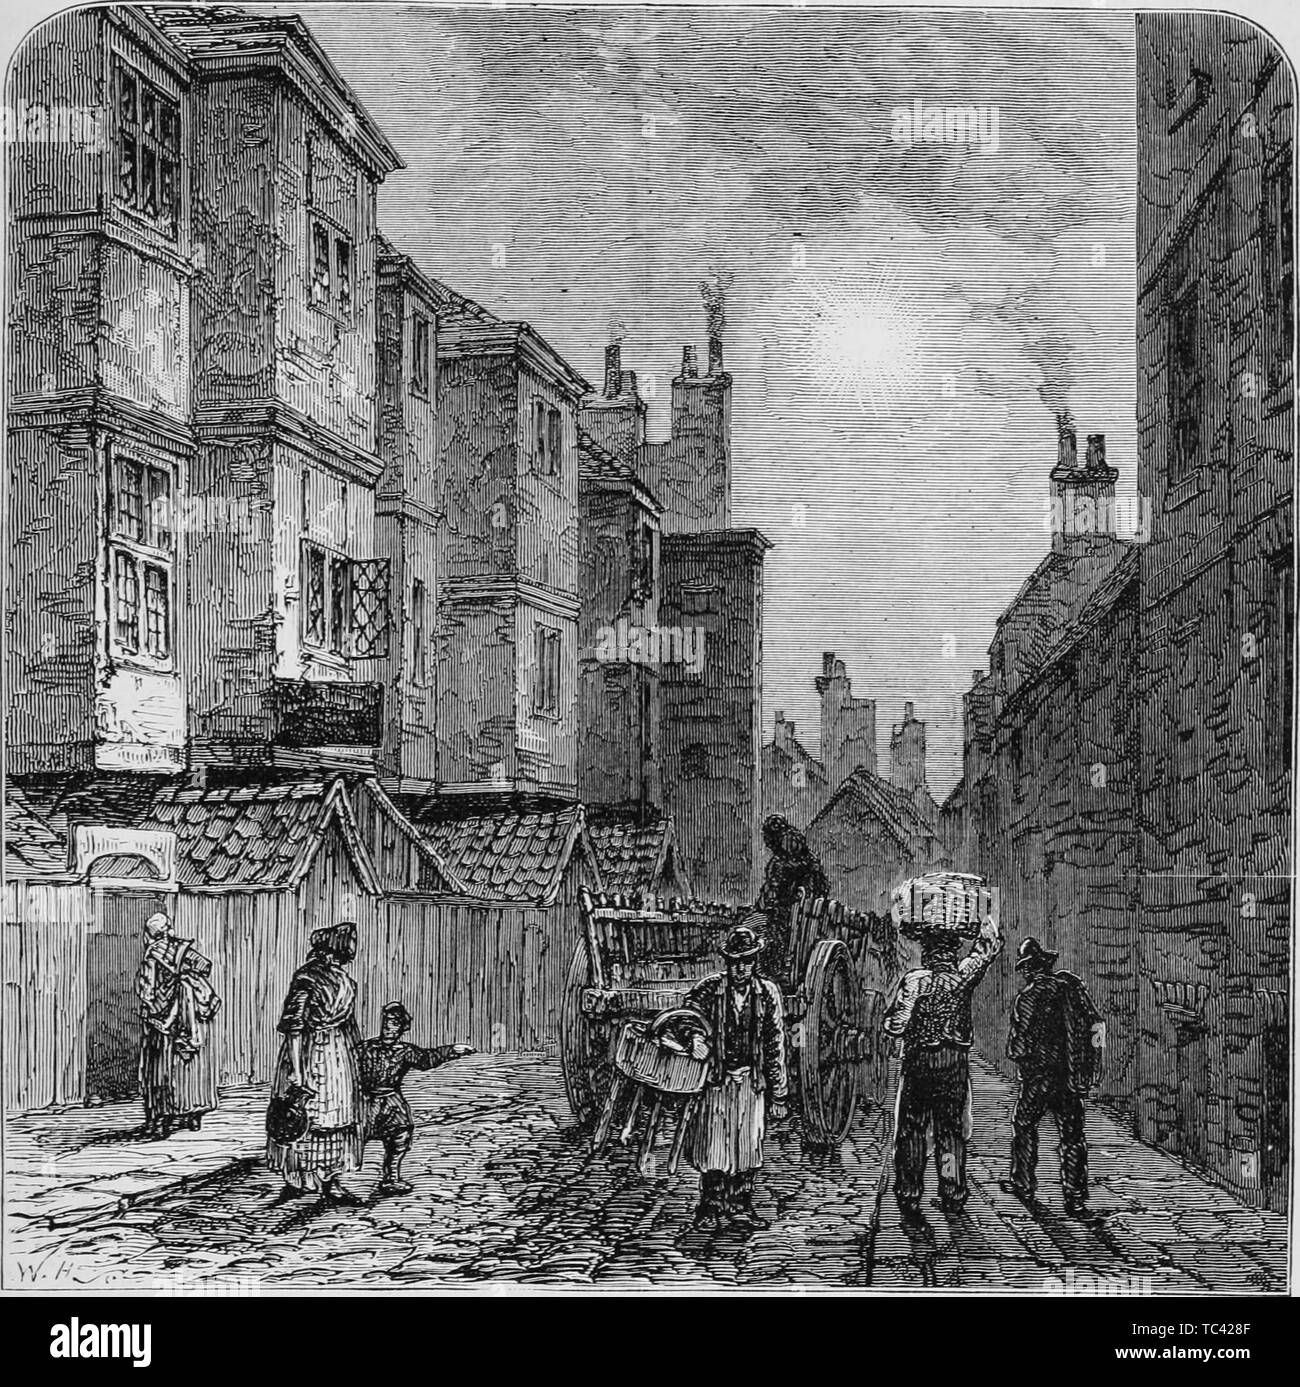 Engraving of the street scene at Milford Lane, London, England, from the book 'Old and new London: a narrative of its history, its people, and its places' by Thornbury Walter, 1873. Courtesy Internet Archive. () Stock Photo